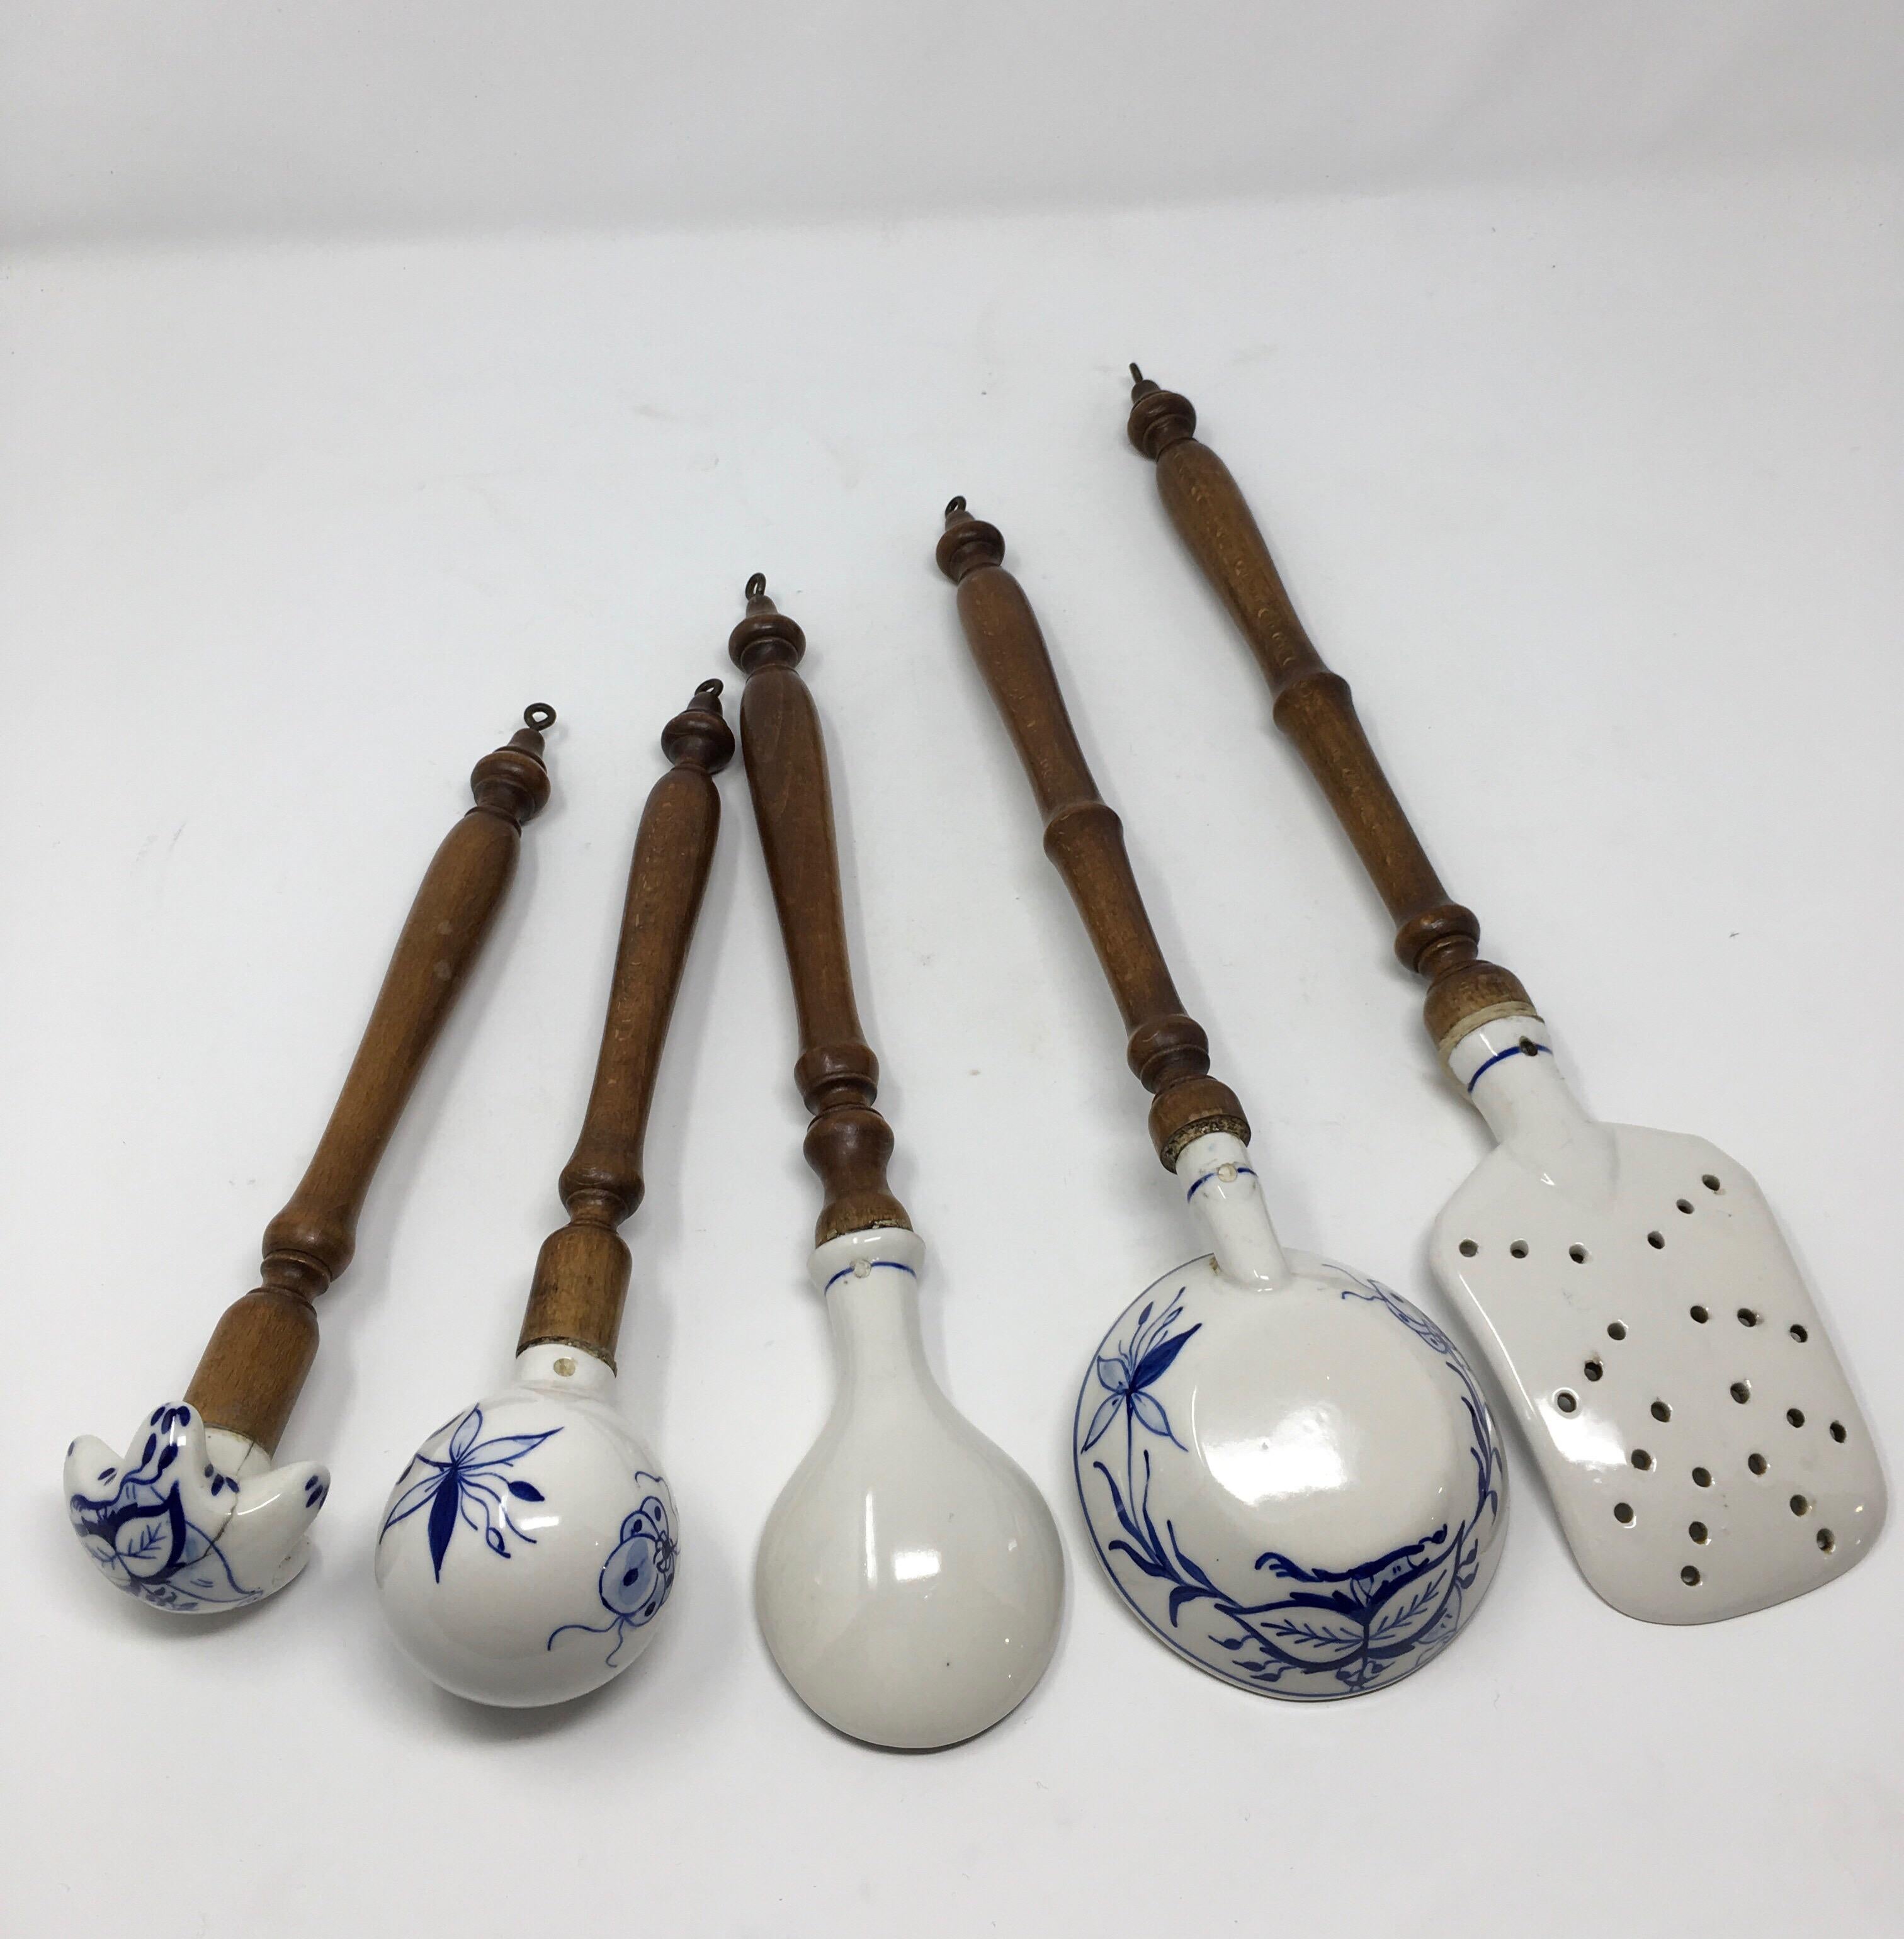 This is an antique set of five German blue and white porcelain kitchen utensils with turned wood handles. The wood handles have small metal hooks to hang and display the pieces. These pieces have been well used and loved, some pieces have chips and